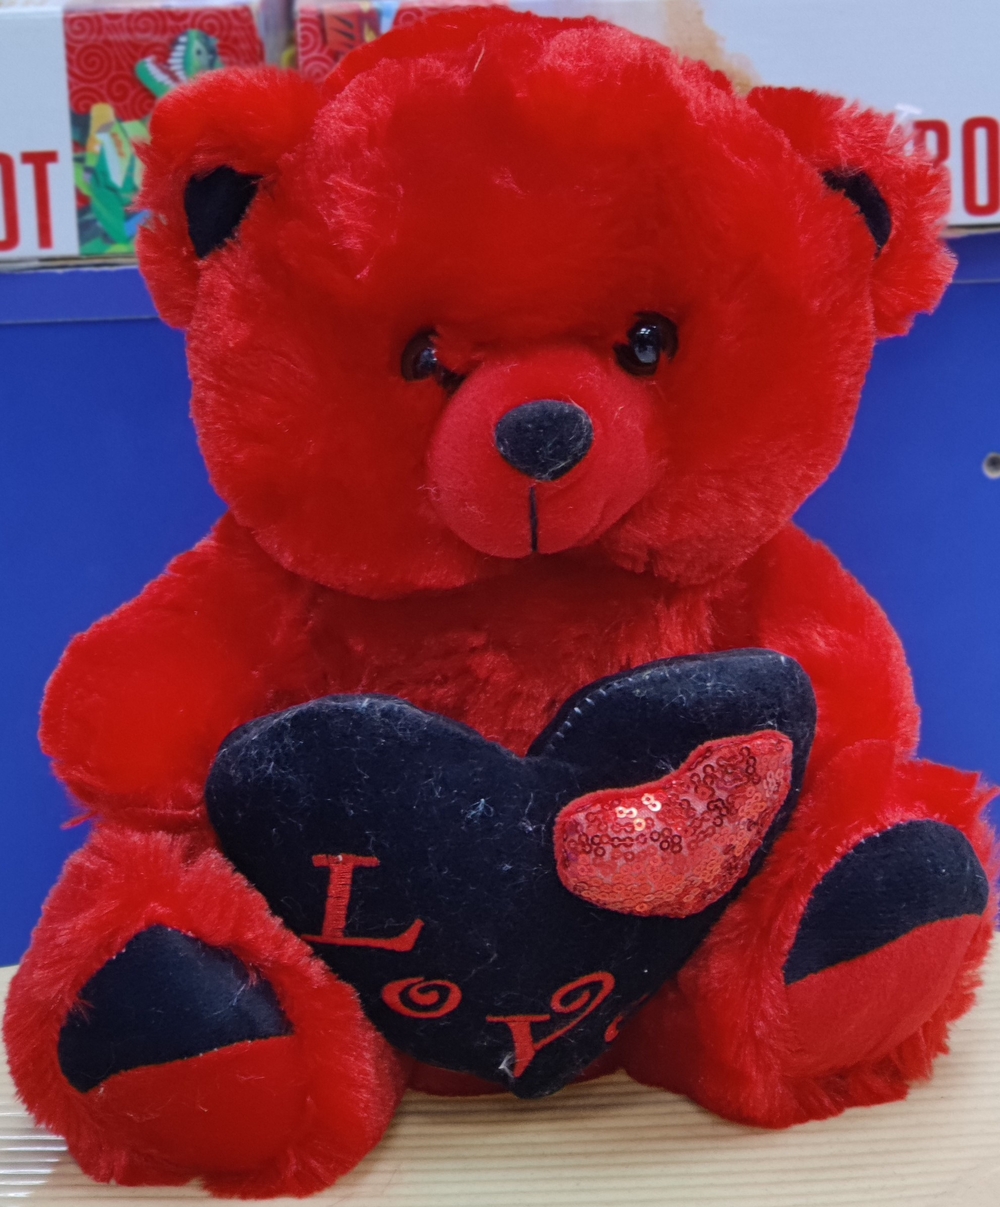 Black Heart Holding Red Teddy( 30cms)